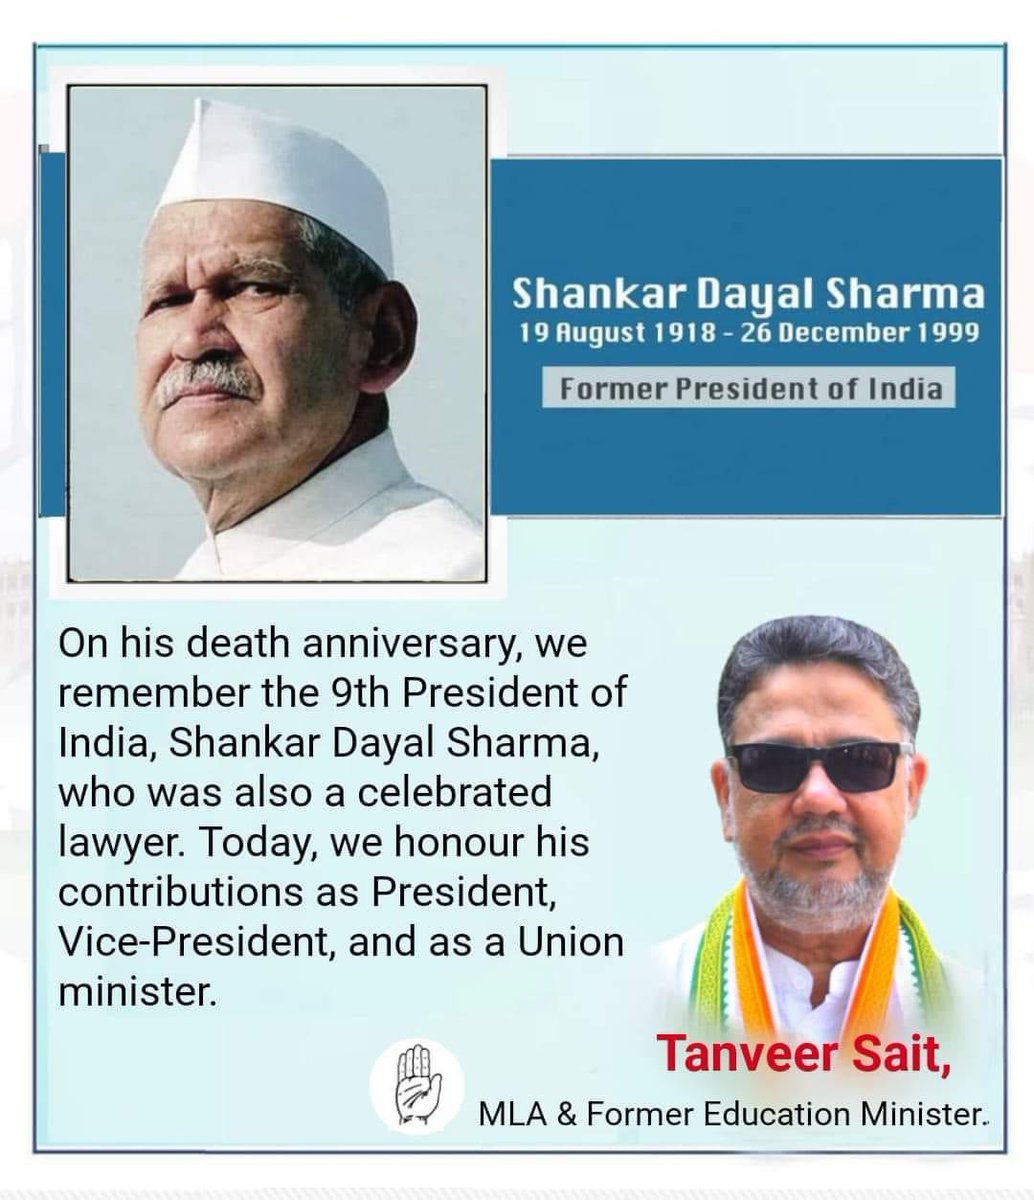 On his death anniversary, we remember the 9th President of India, Shankar Dayal Sharma, who was also a celebrated lawyer. Today, we honour his contributions as President, Vice-President, and as a Union minister.